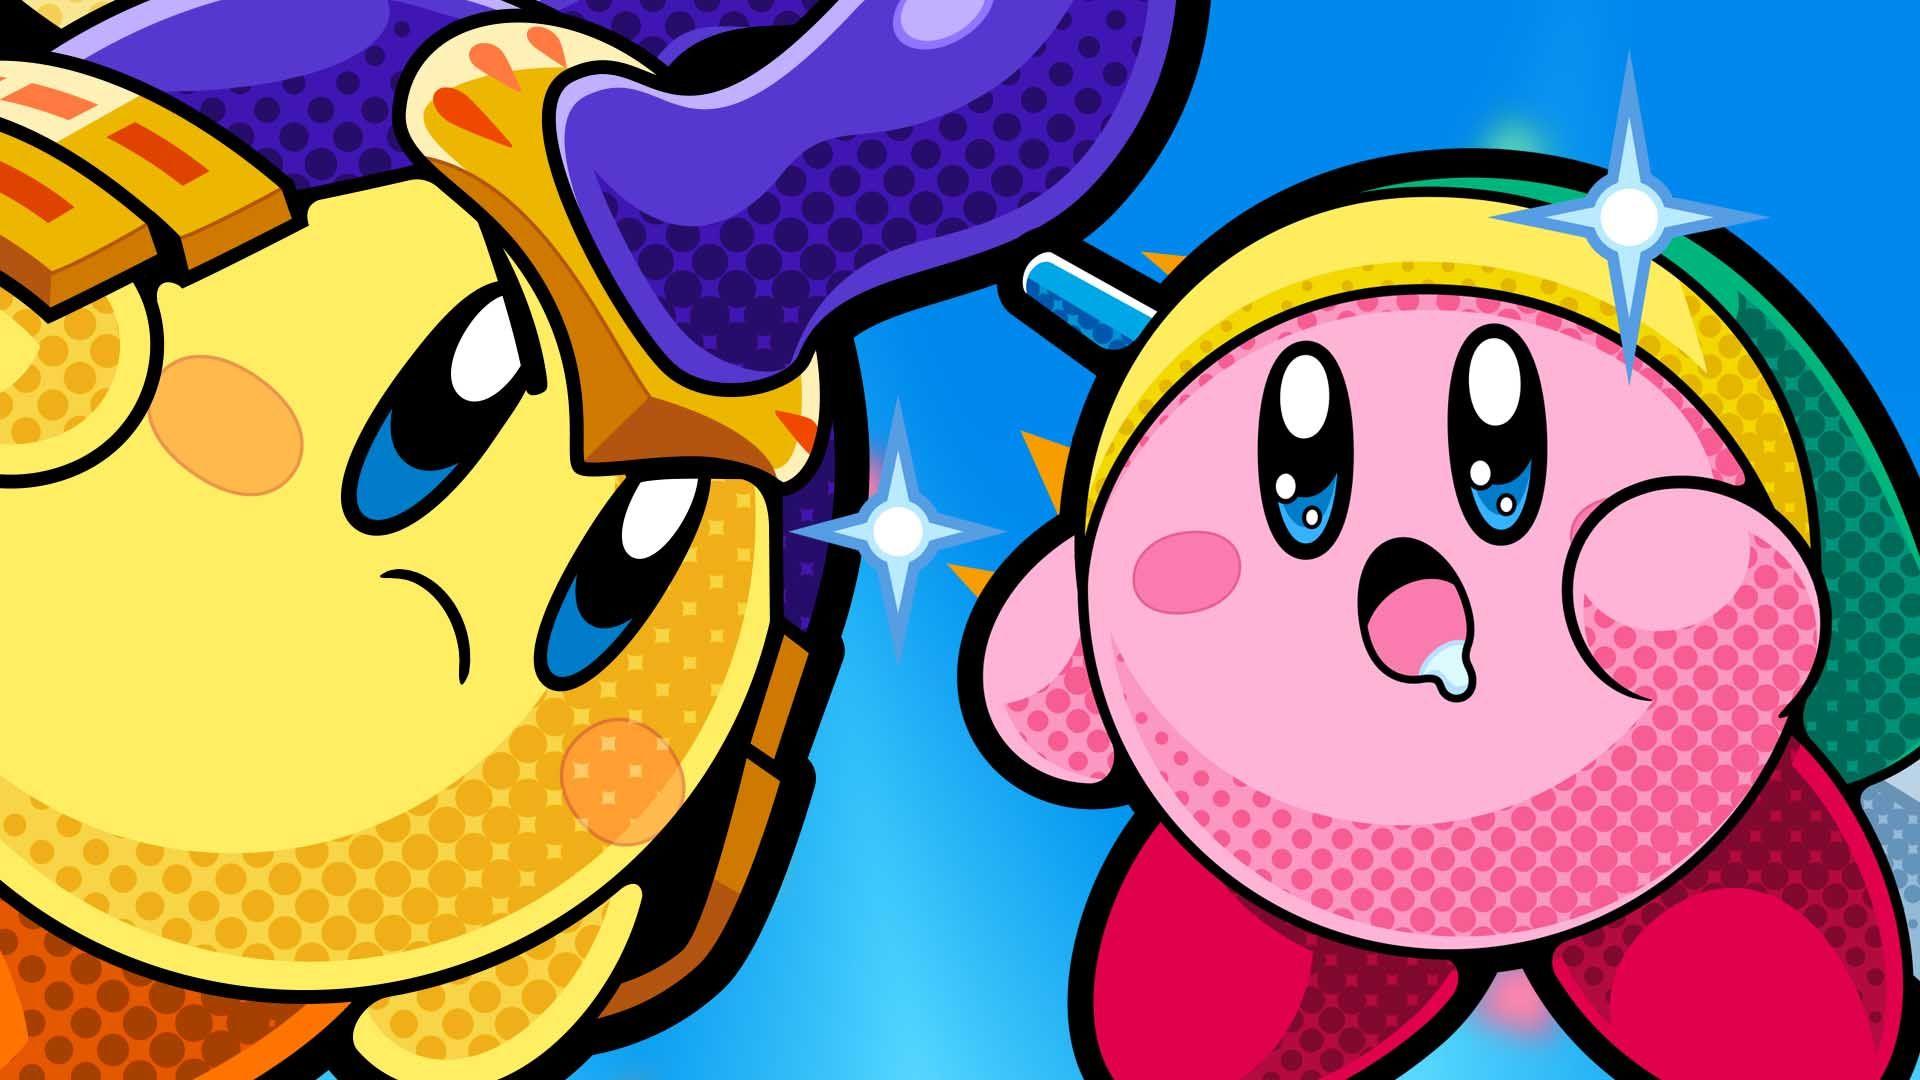 Check Out Some Adorable Kirby Battle Royale Wallpapers - My